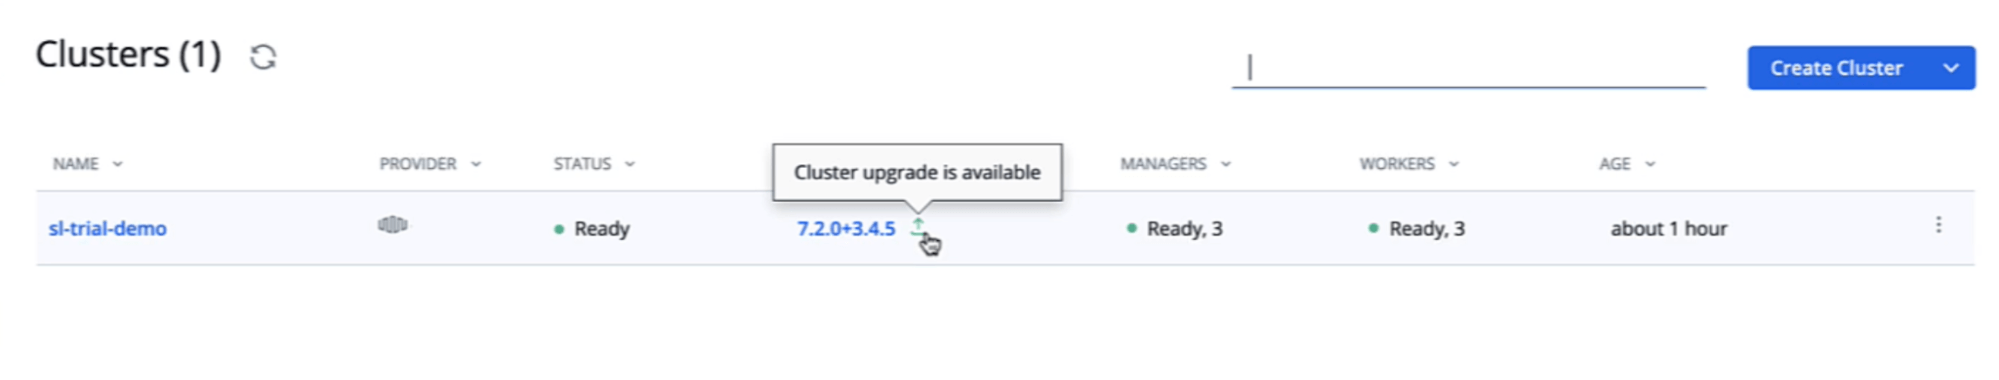 cluster upgrade available within the mirantis container cloud gui